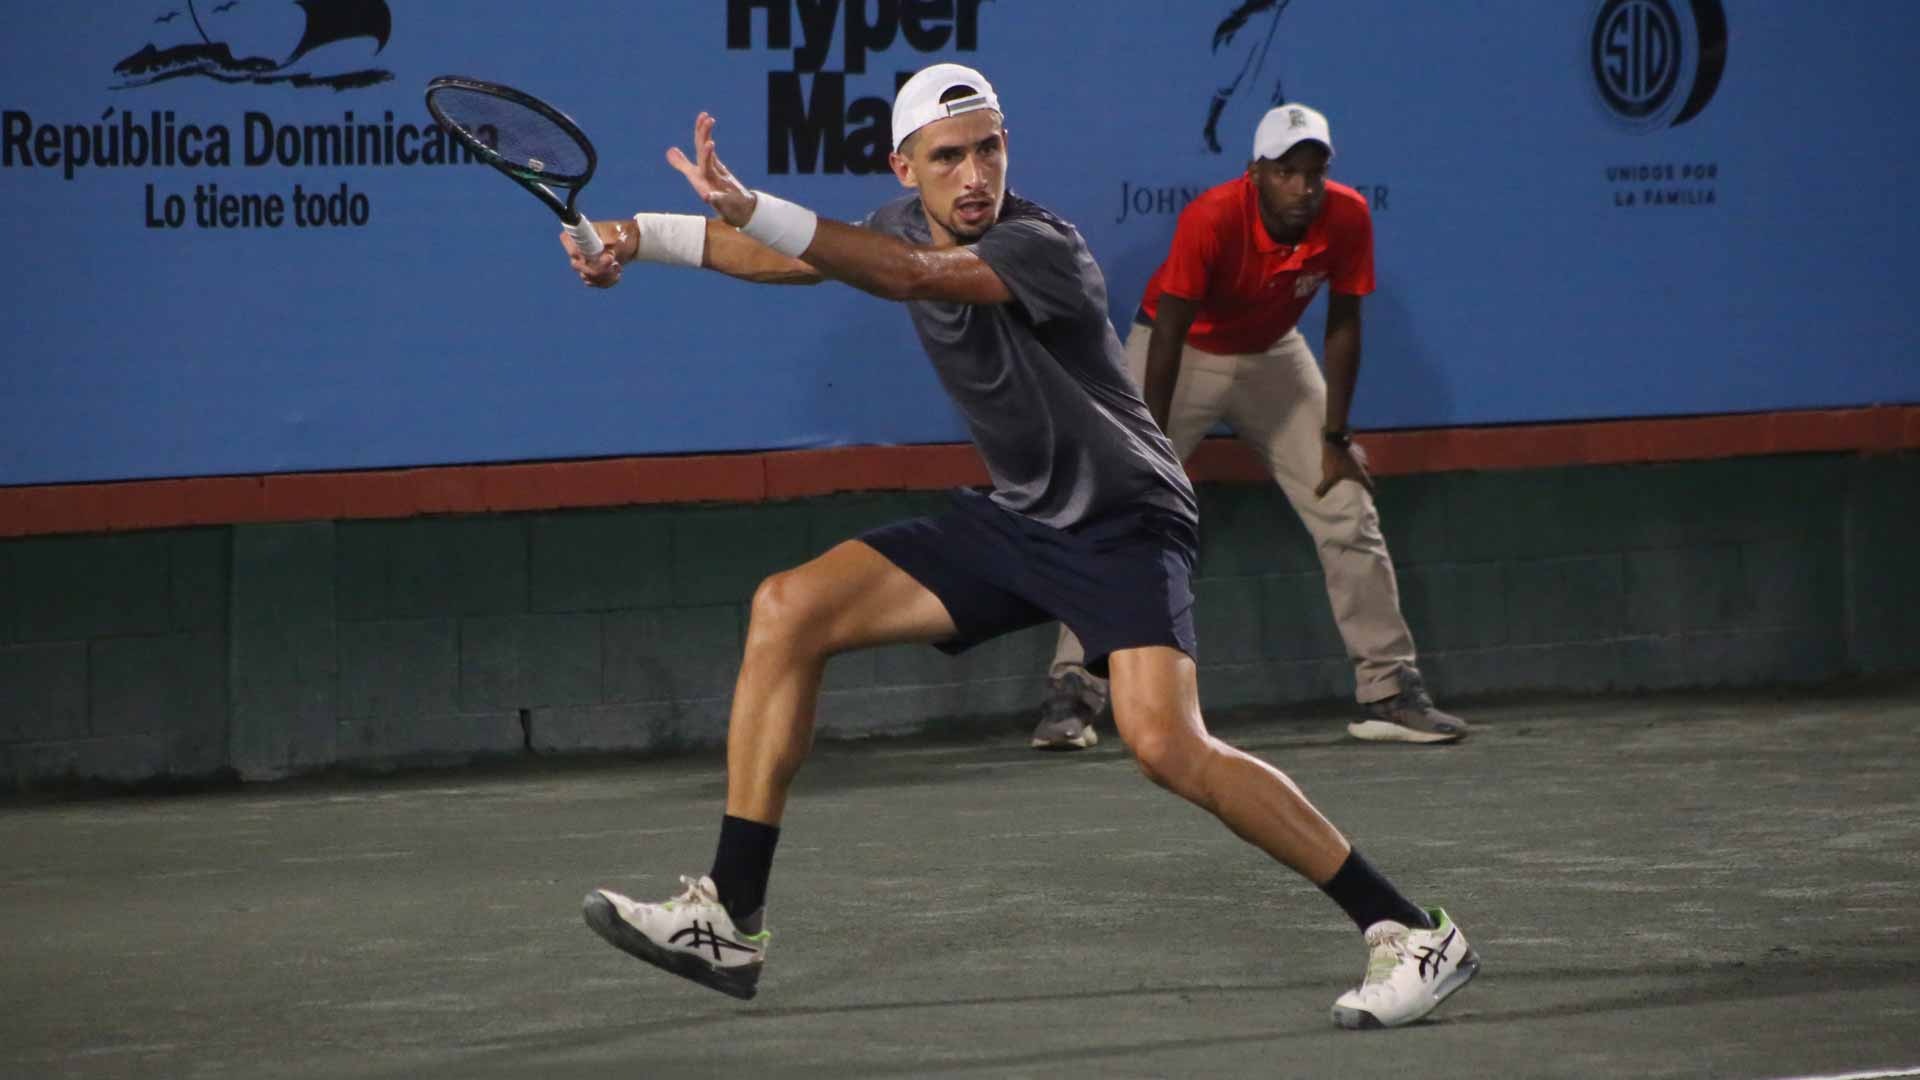 <a href='https://www.atptour.com/en/players/pedro-cachin/cg04/overview'>Pedro Cachin</a> in action Sunday in the Santo Domingo Challenger final.